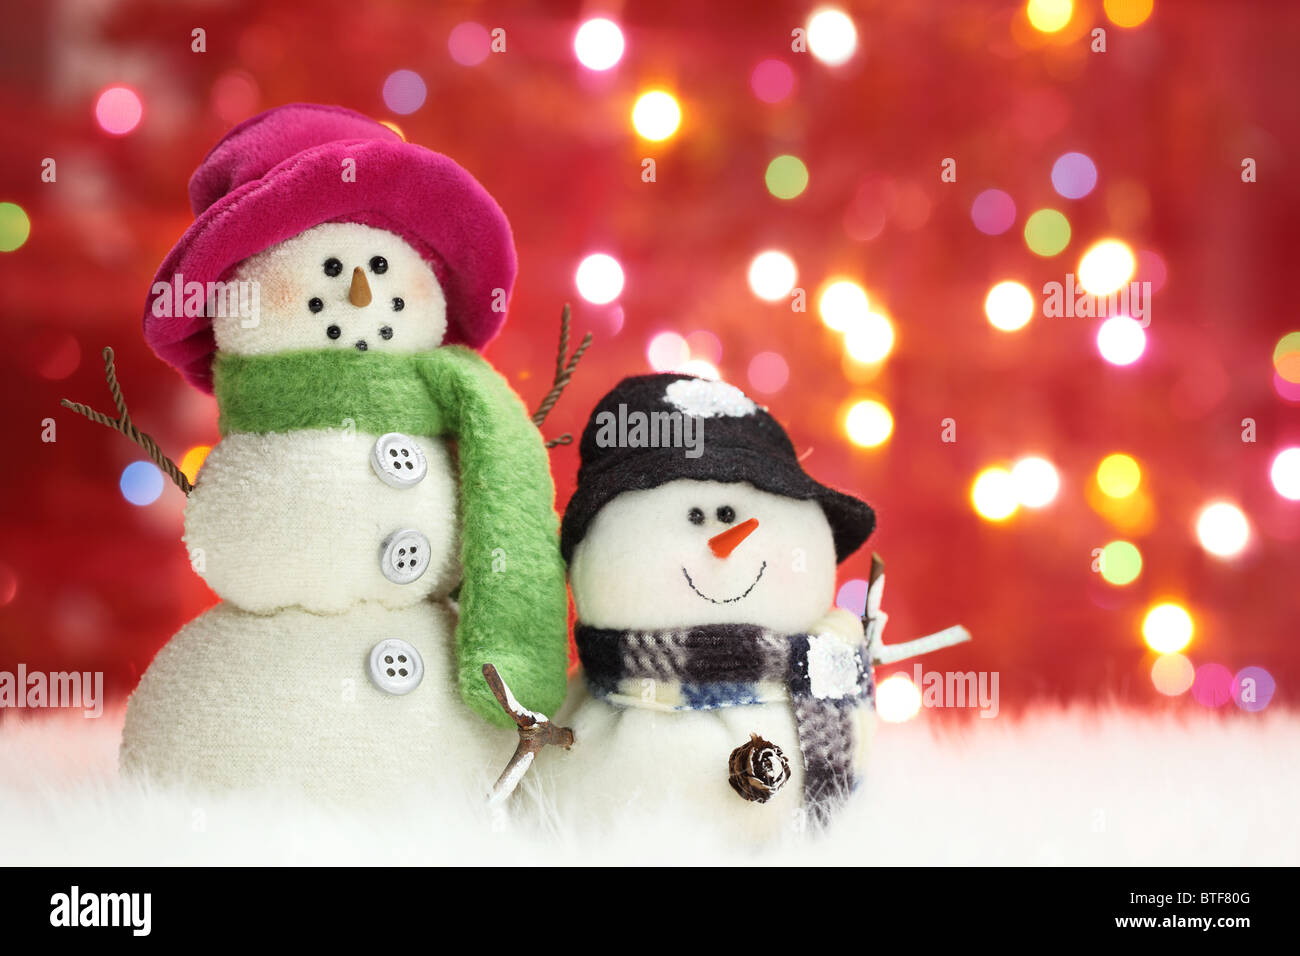 Festive snowman with Christmas light background Stock Photo